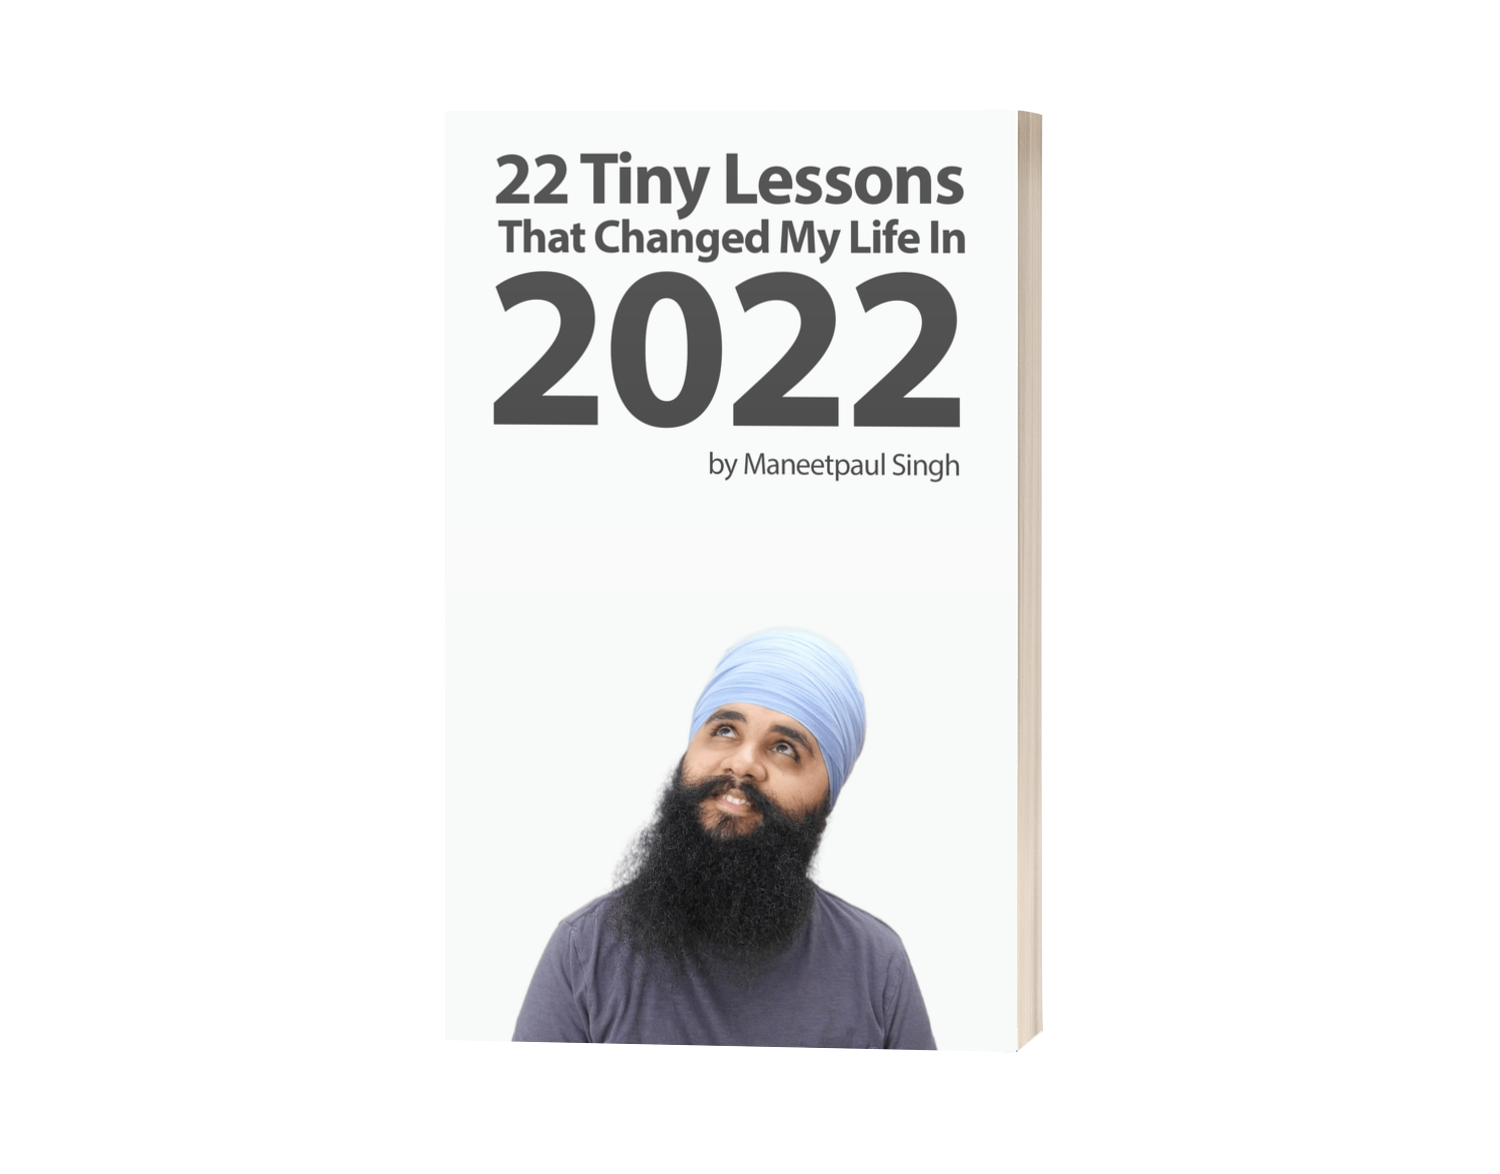 22 Tiny Lessons That Changed My Life in 2022